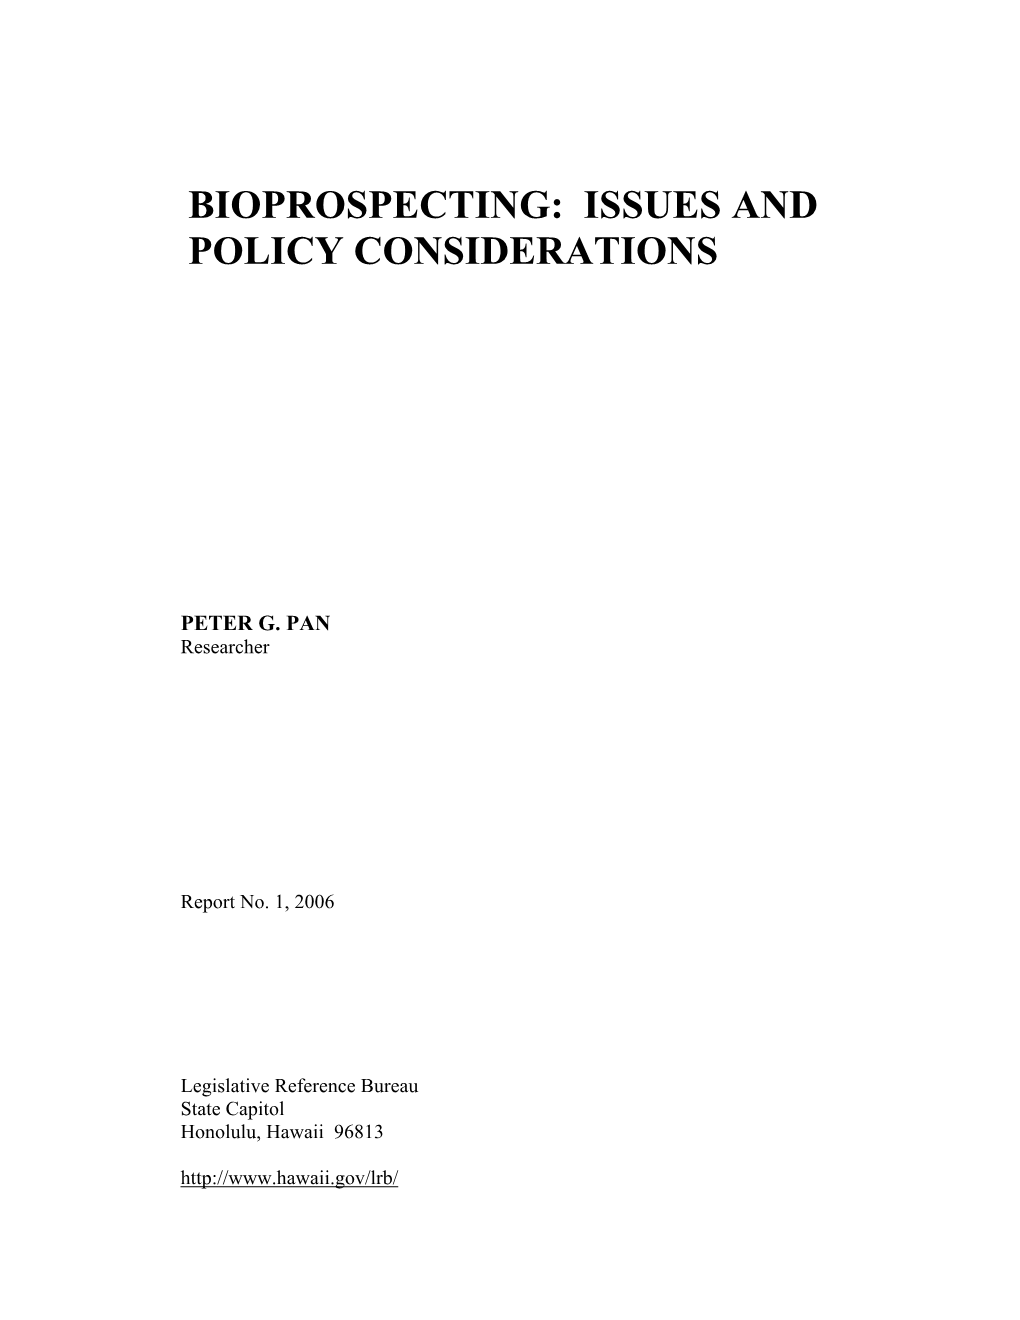 Bioprospecting: Issues and Policy Considerations